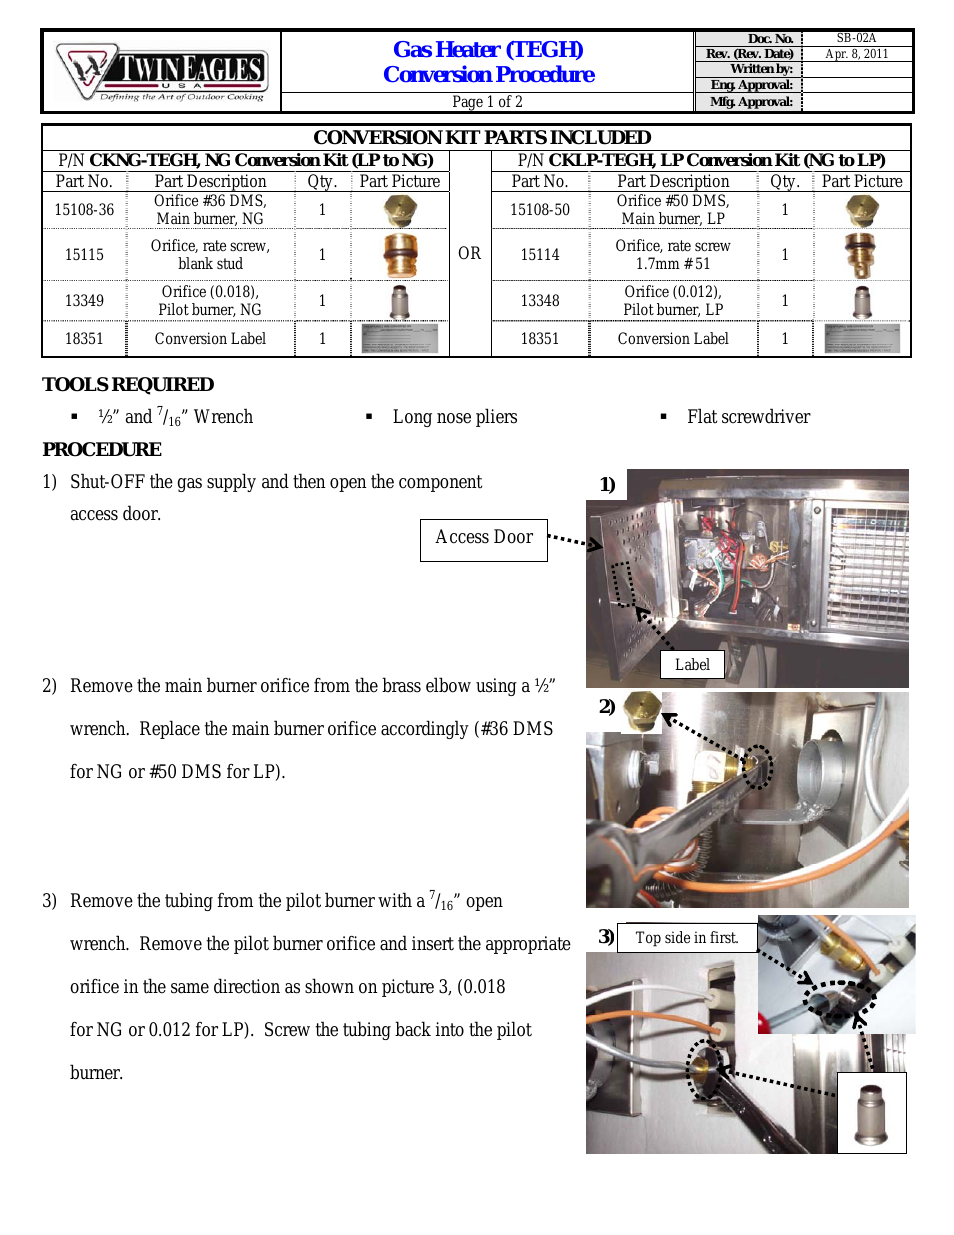 Gas Heater LP to NG Conversion